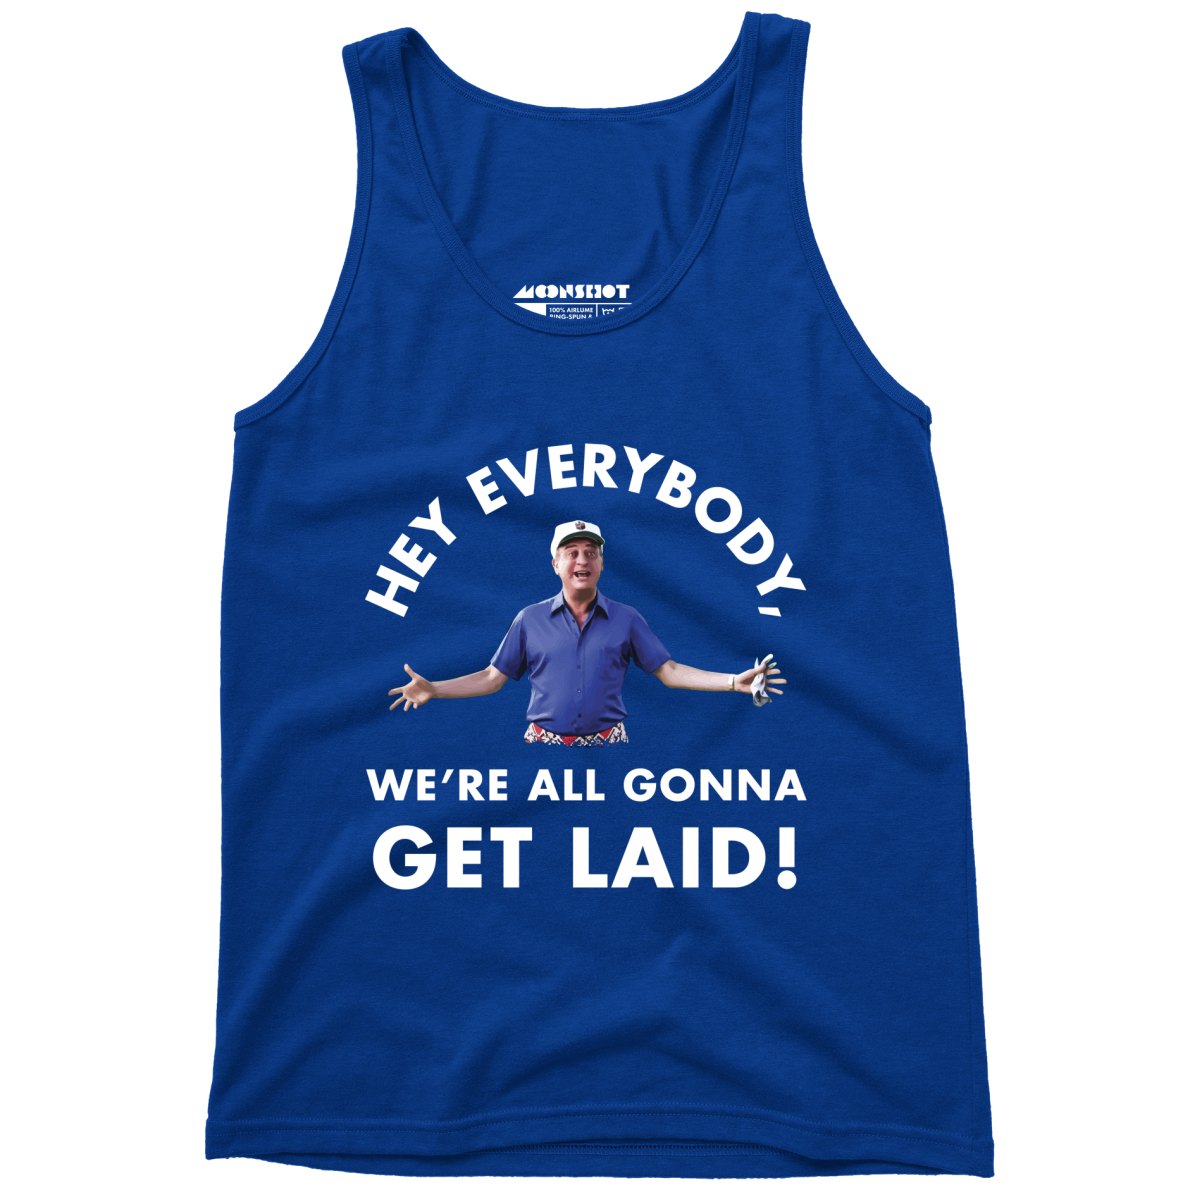 Hey Everybody, We're All Gonna Get Laid! - Unisex Tank Top